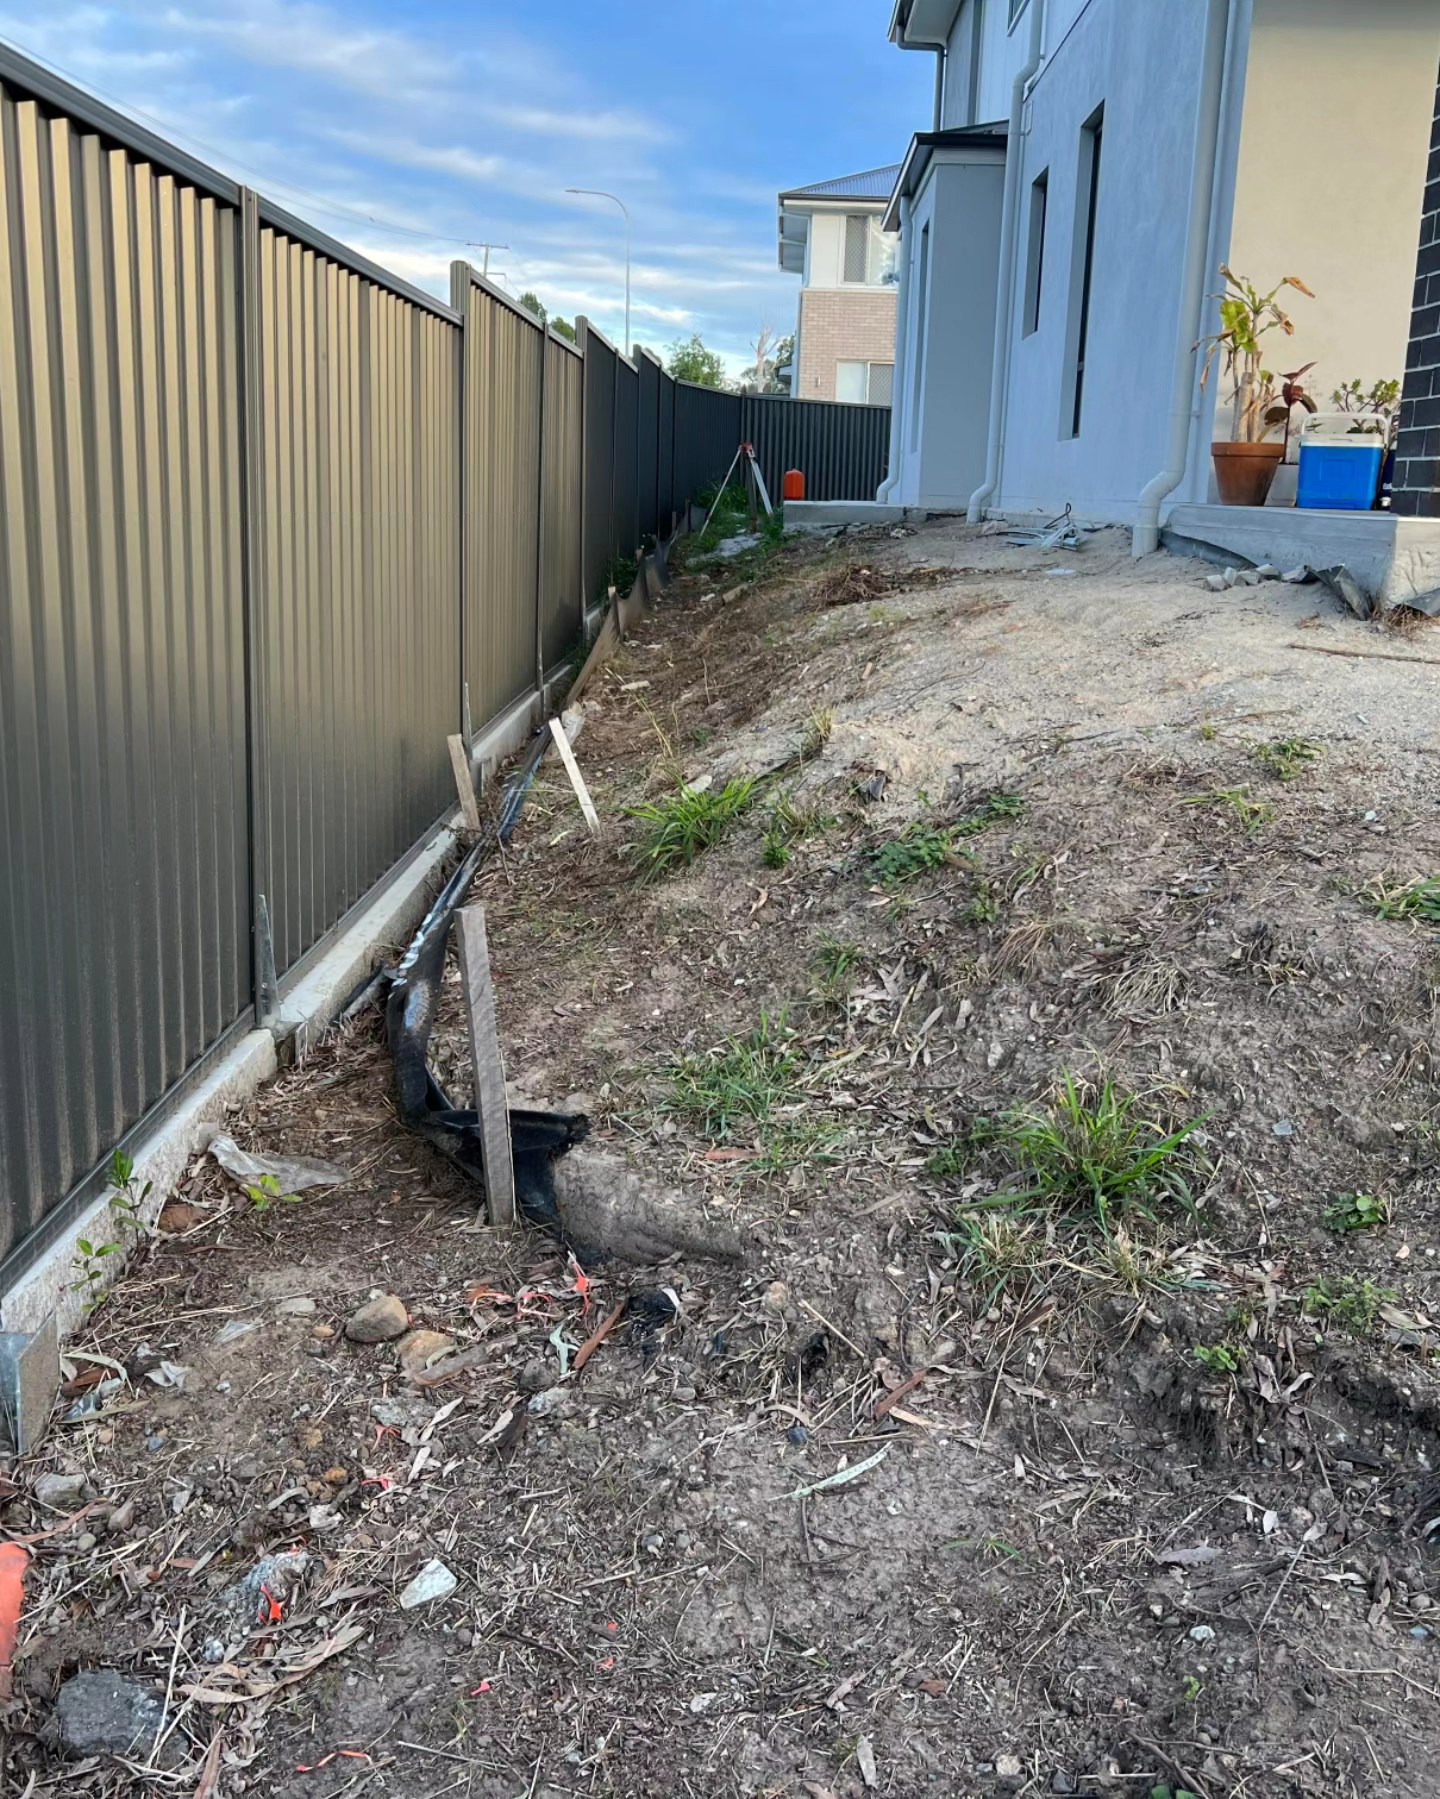 Despite the challenges, the project was a success. The once uneven and cluttered backyard was transformed into a neat, turfed area with a new boundary concrete retaining wall and colorbond fence. The result was a testament to the team’s skills and dedication.